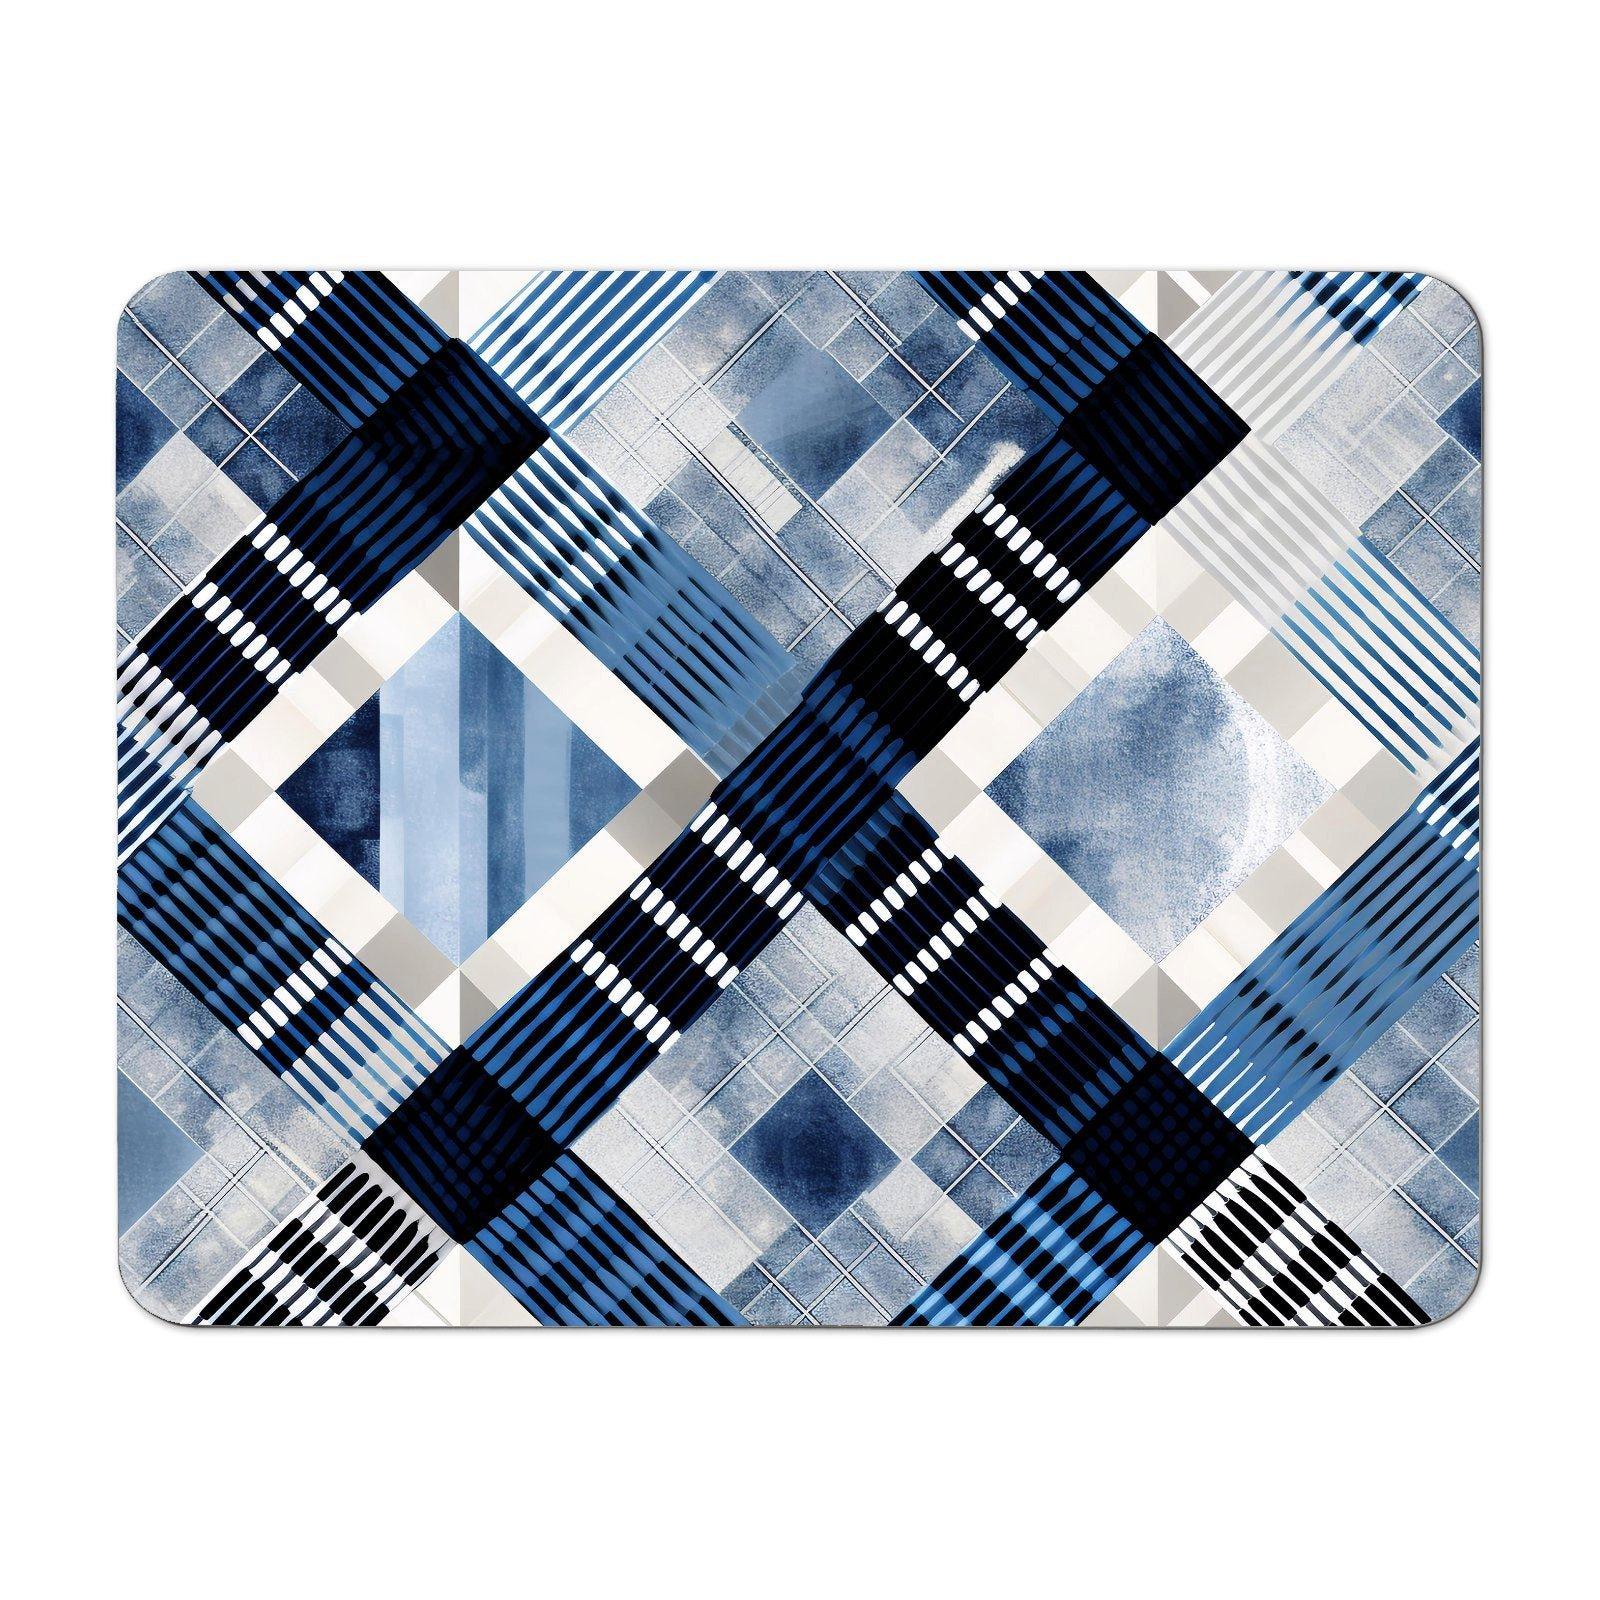 Checkered Square Black And Blue Placemats